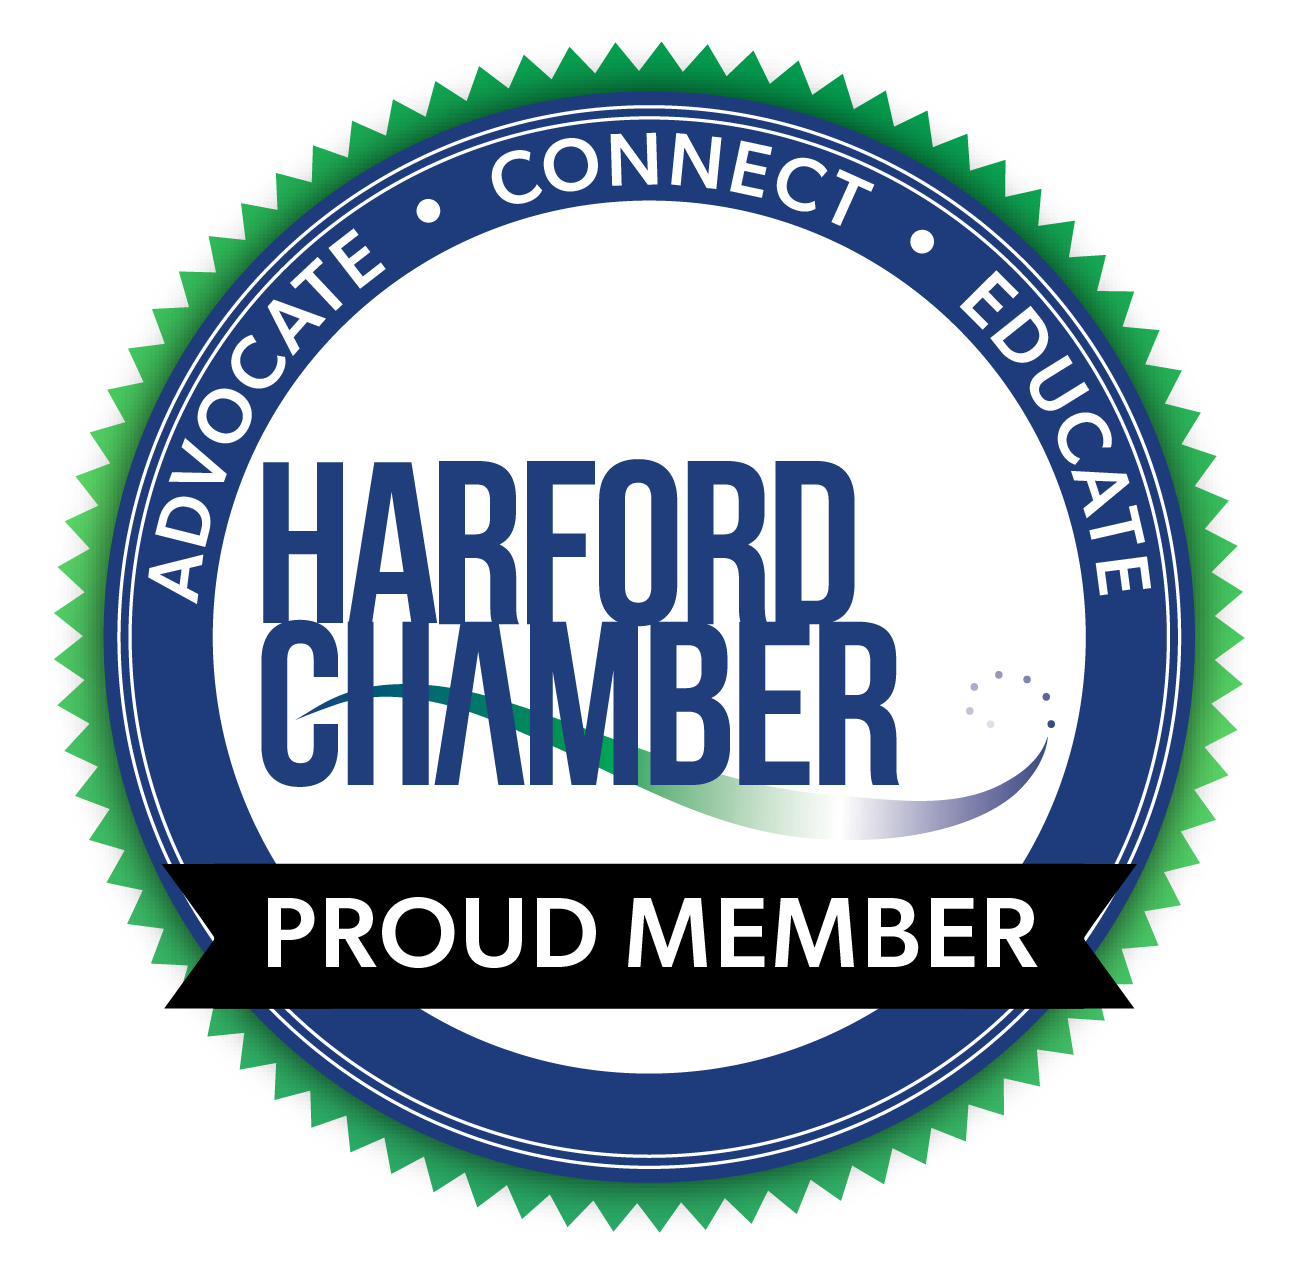 Membership Badge indicating that E-A Enterprises LLC is a member of the Harford County Chamber of Commerce